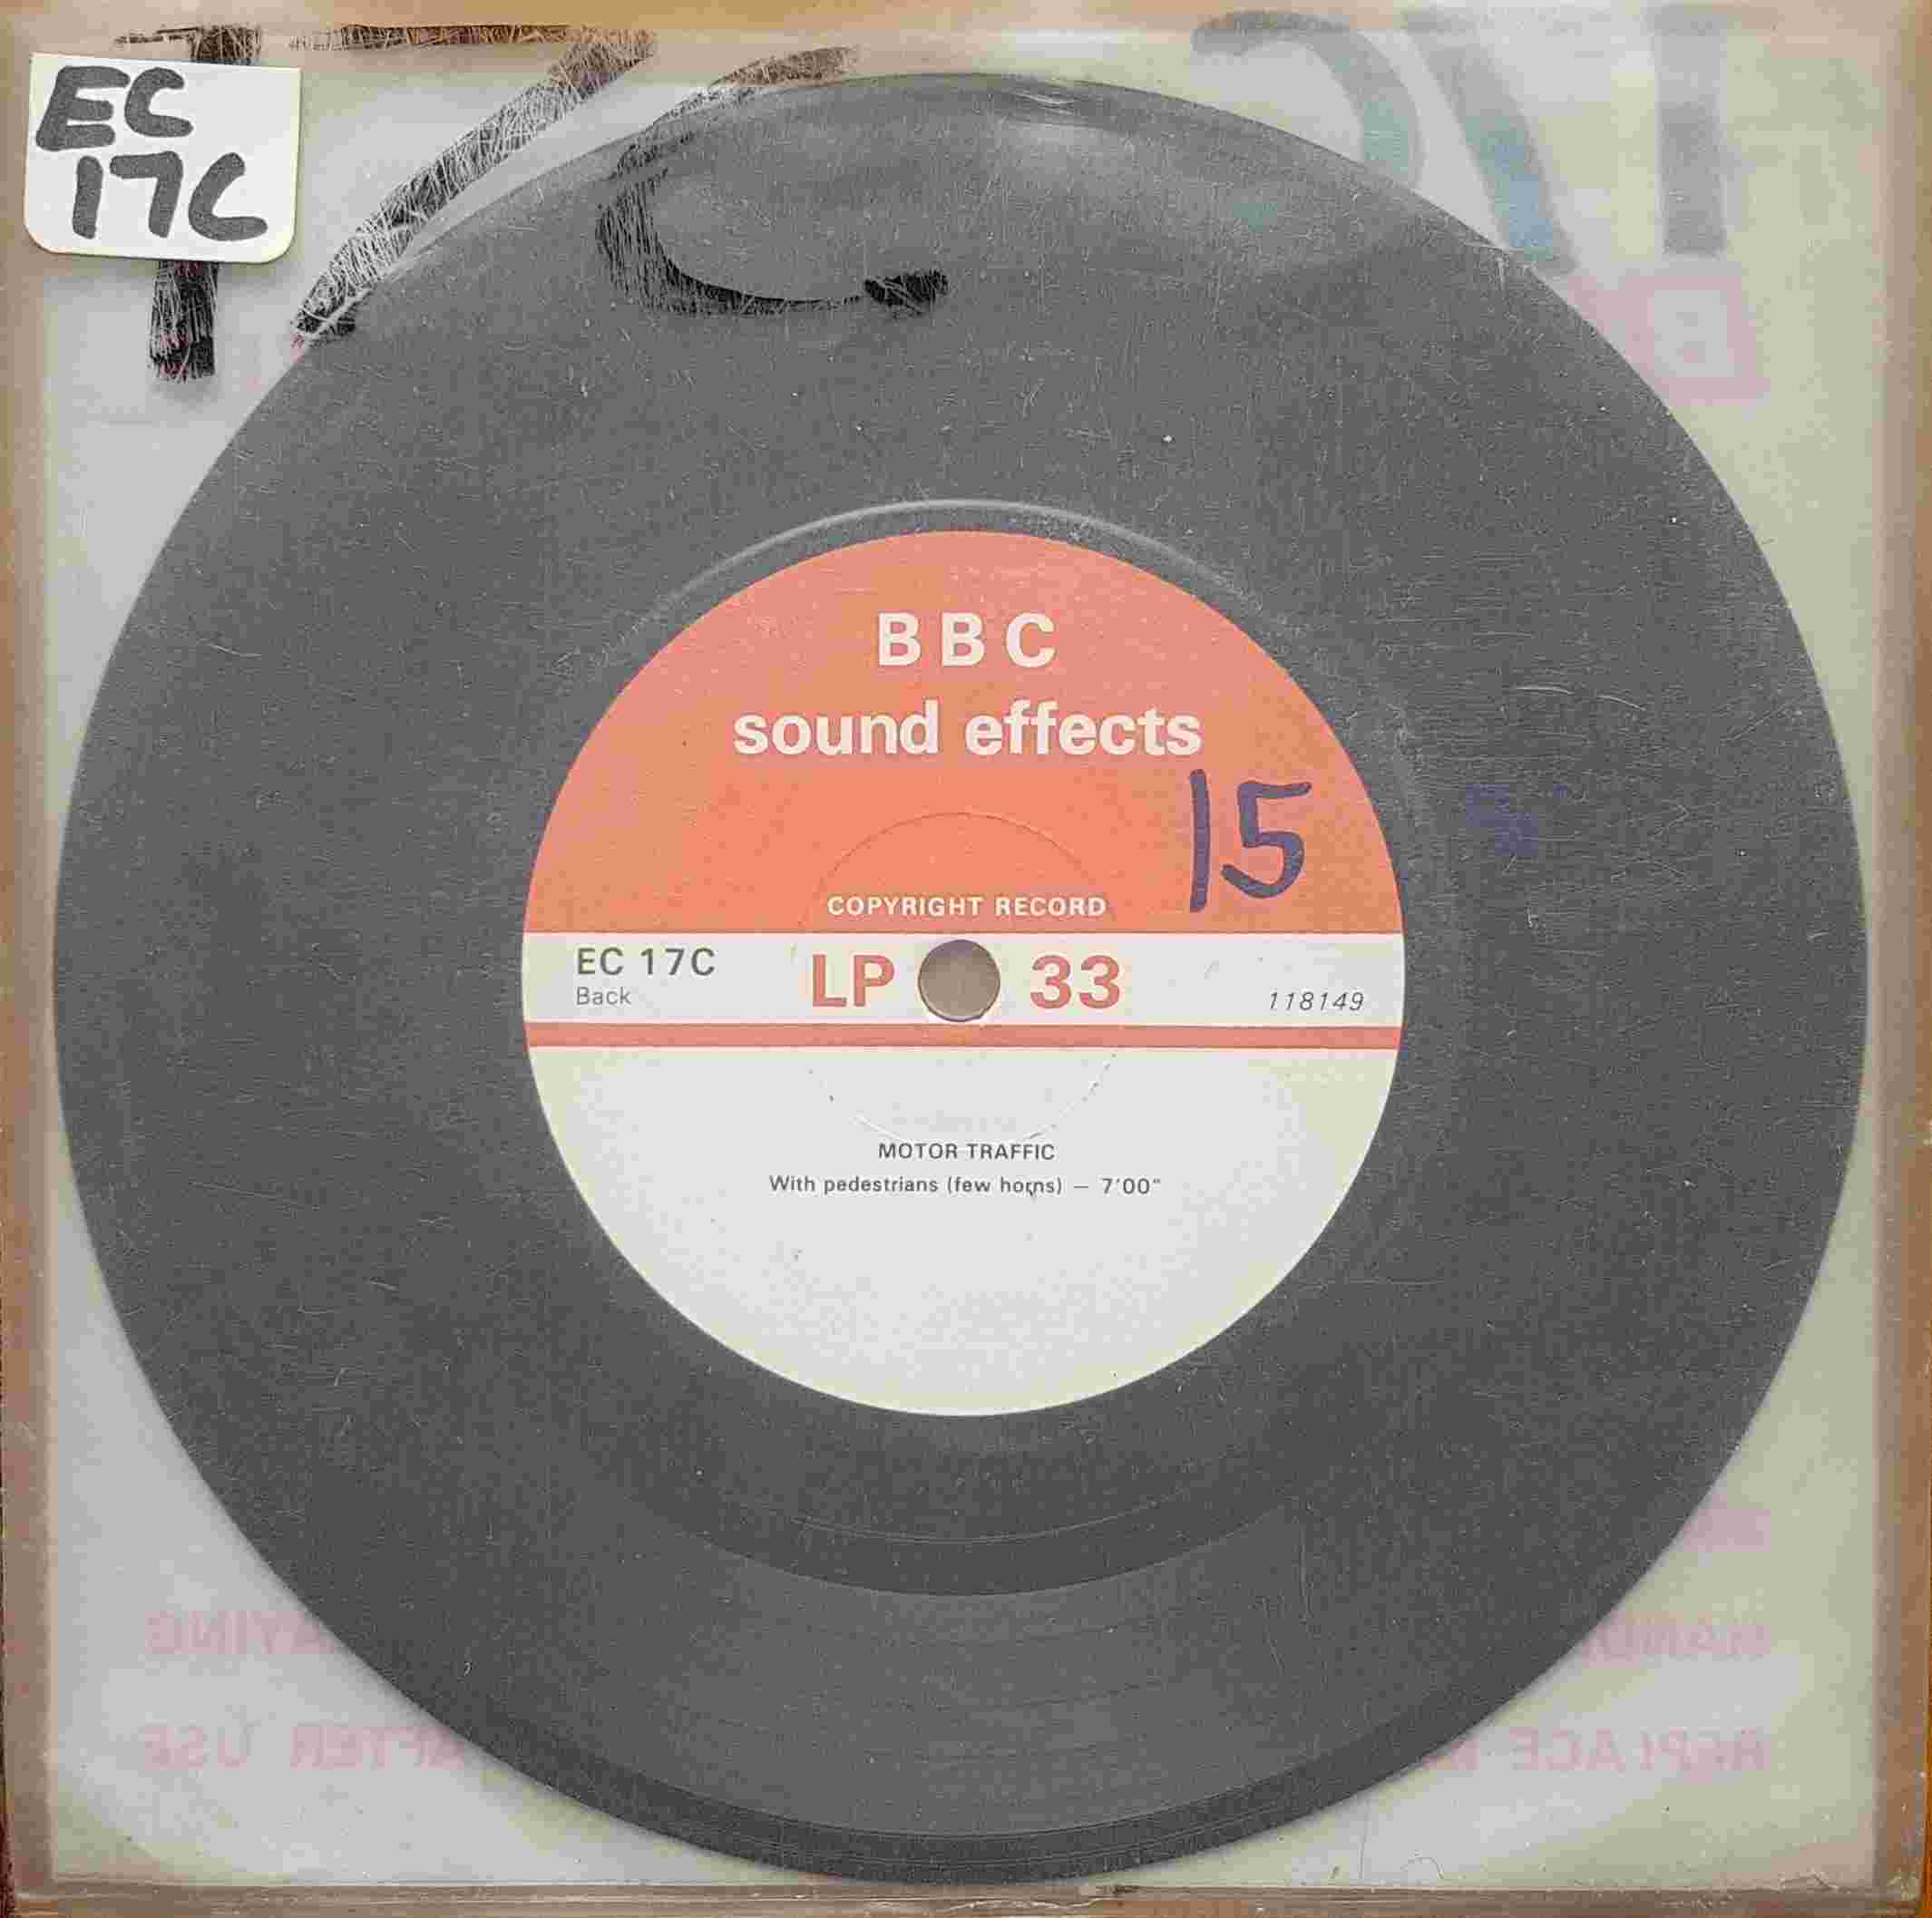 Picture of EC 17C Motor traffic by artist Not registered from the BBC records and Tapes library